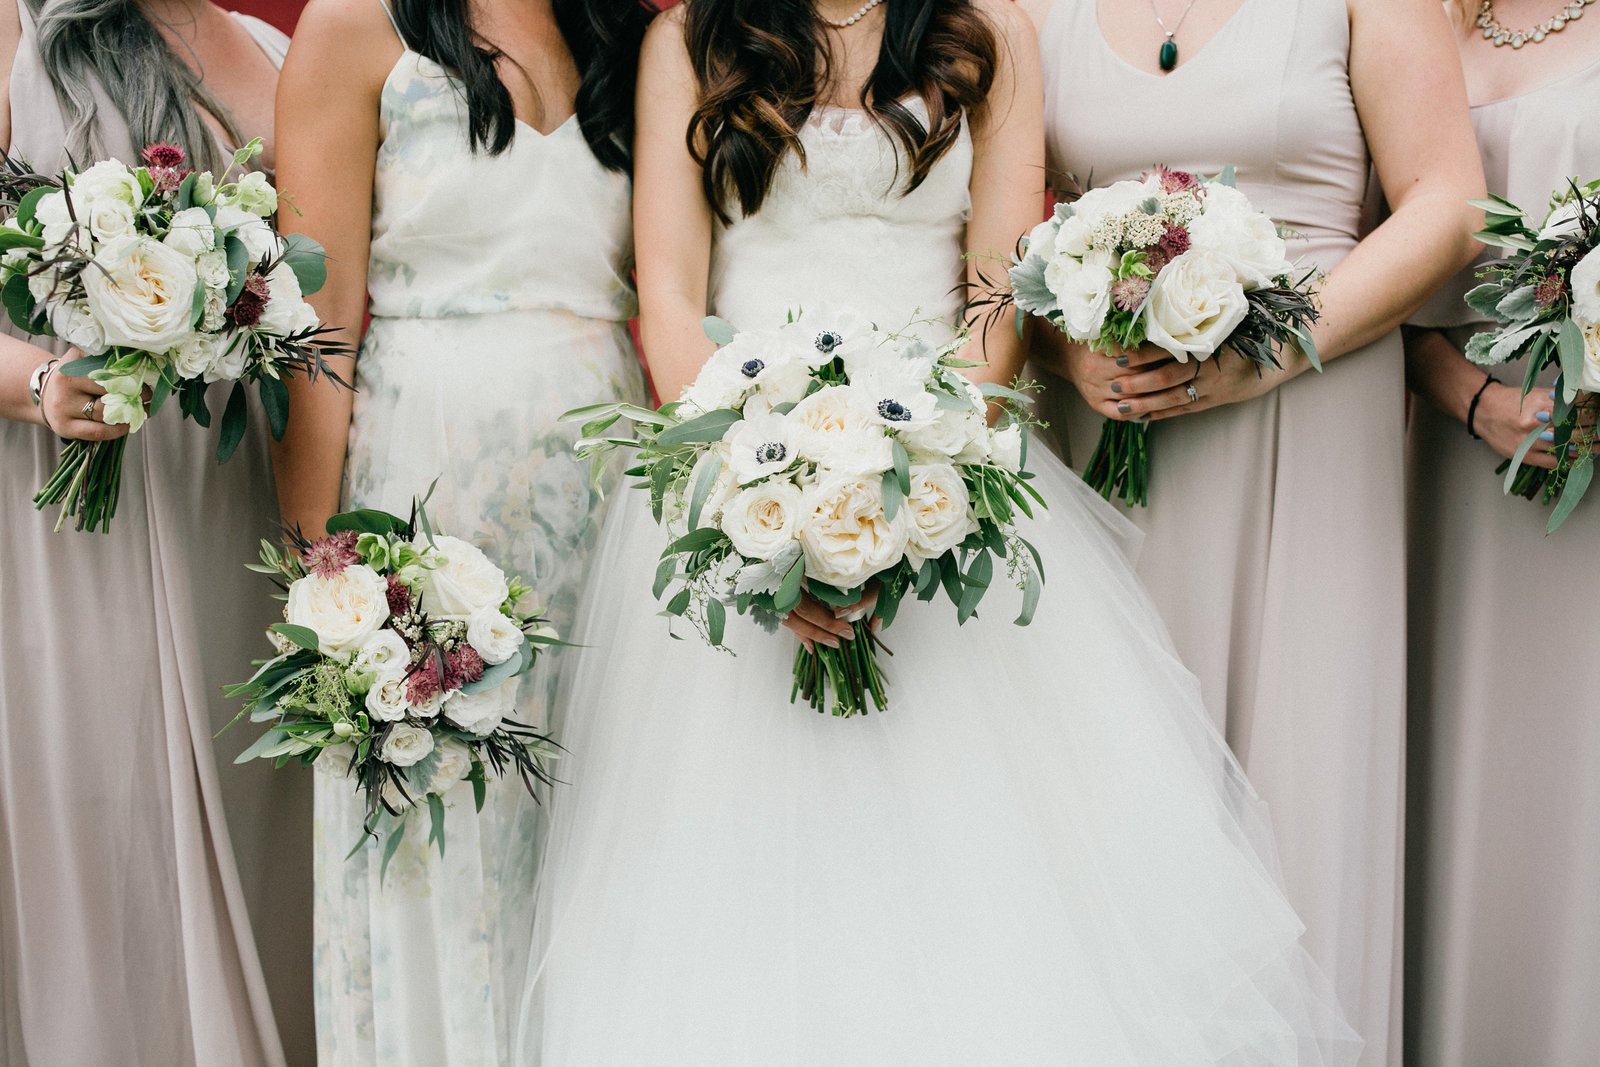 Bride and her bridesmaids compliment each other with their natural hued dresses.